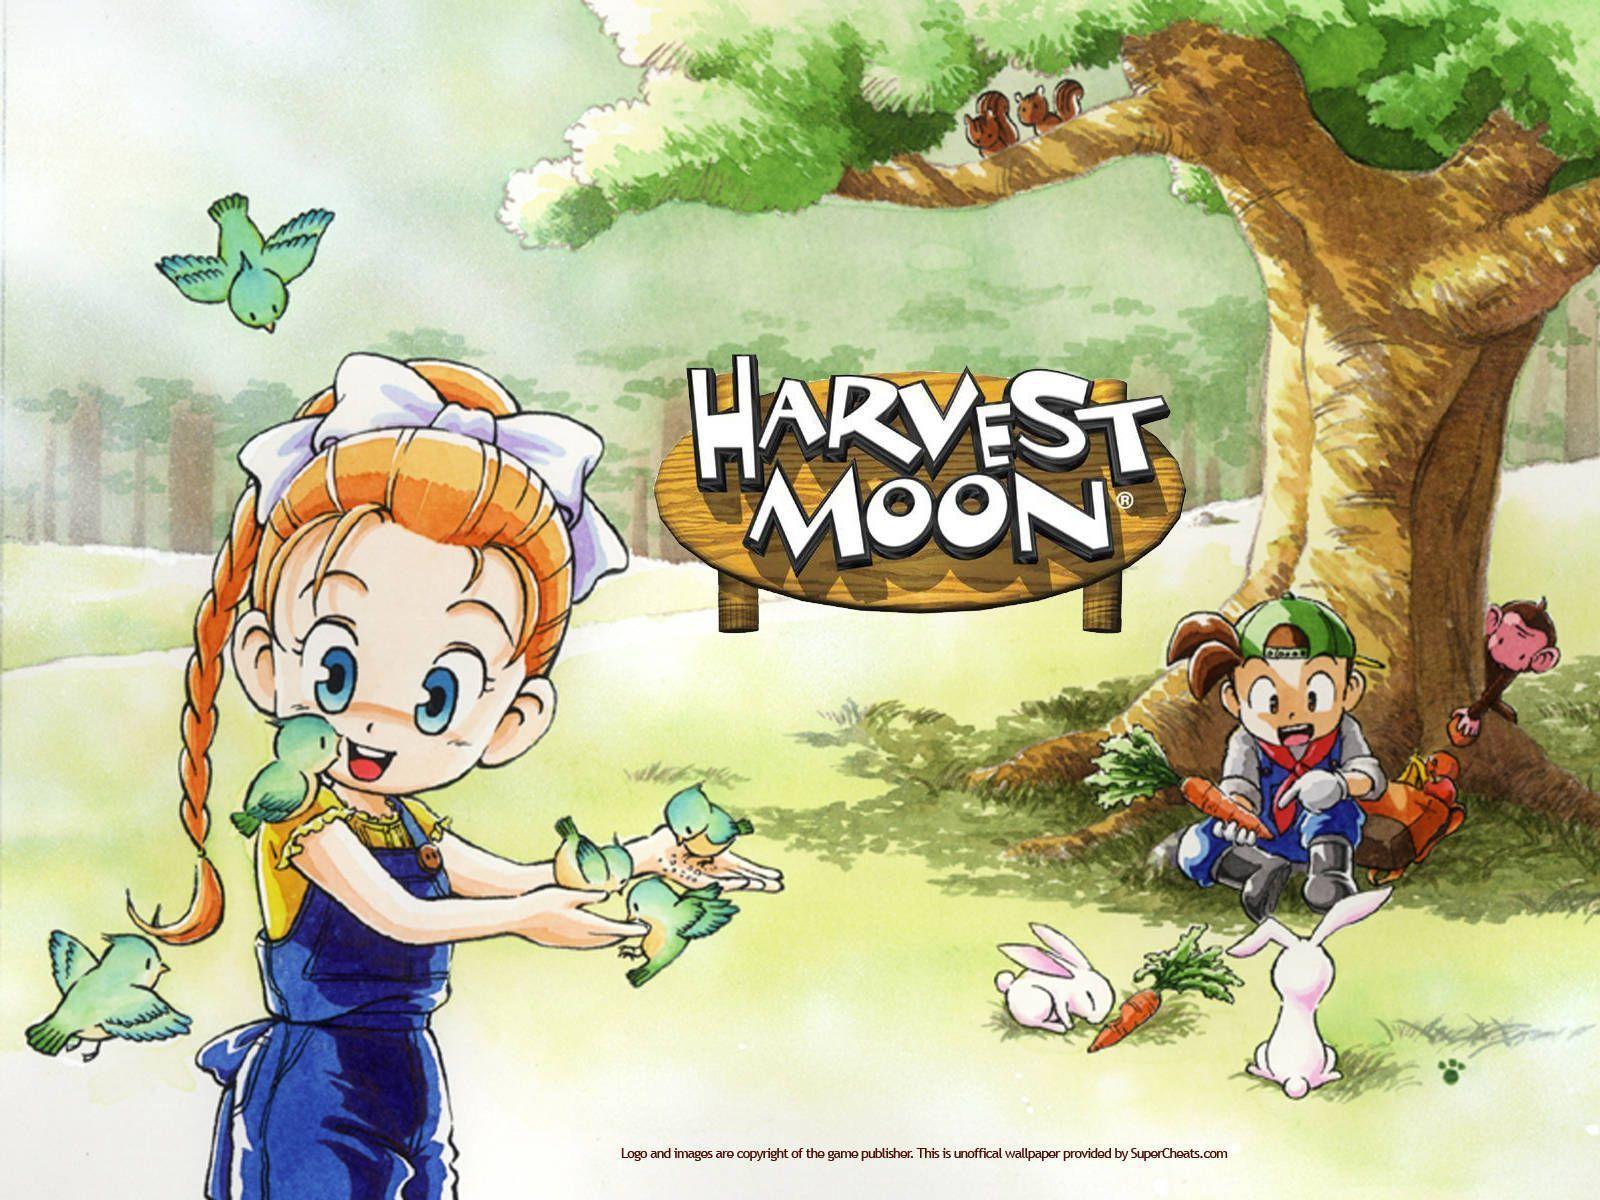 Harvest Moon Wallpapers Top Free Harvest Moon Backgrounds Images, Photos, Reviews